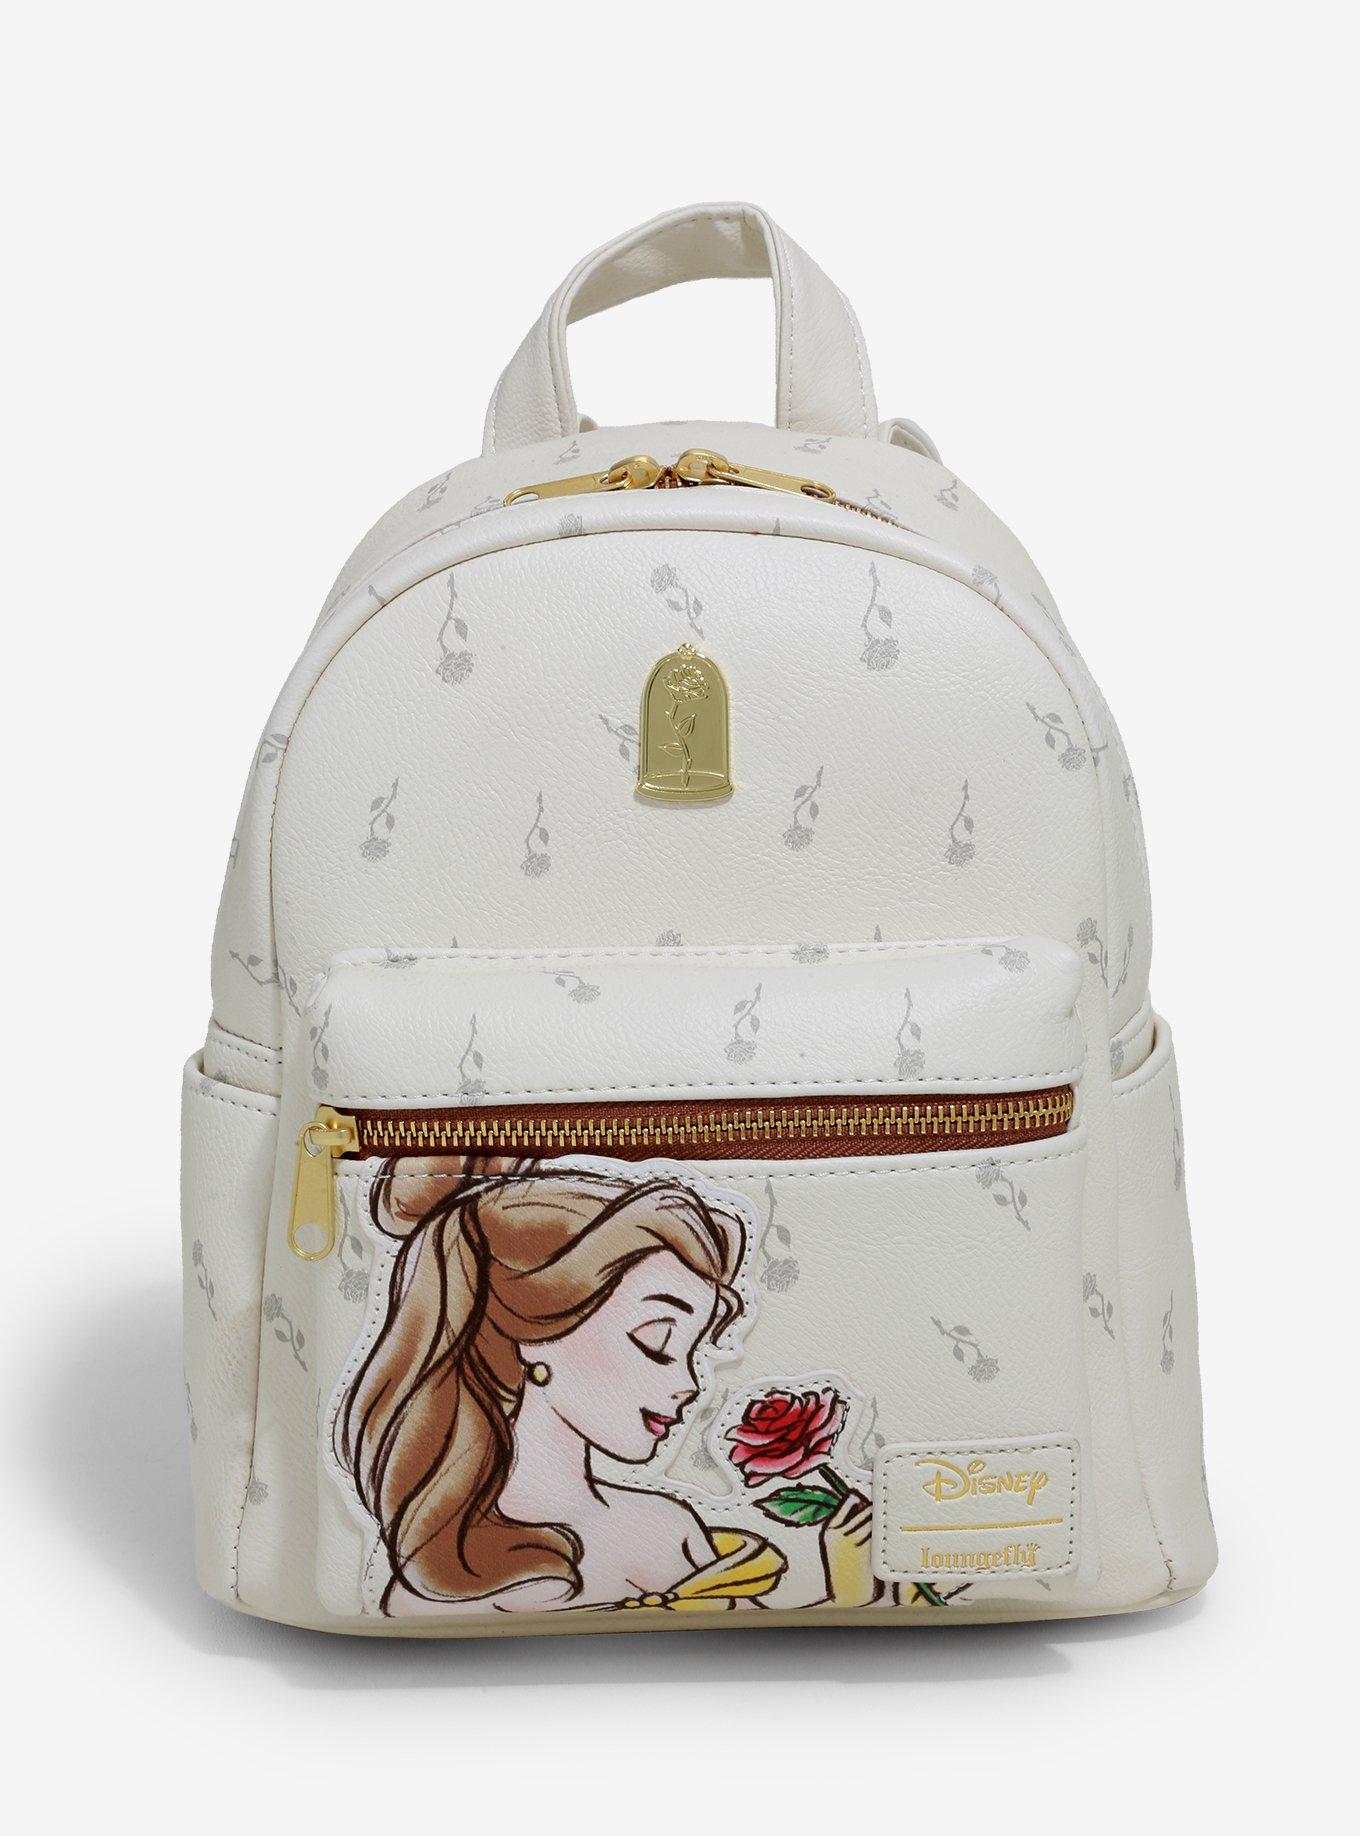 Buy Your Beauty and the Beast Loungefly Backpack (Free Shipping) - Merchoid